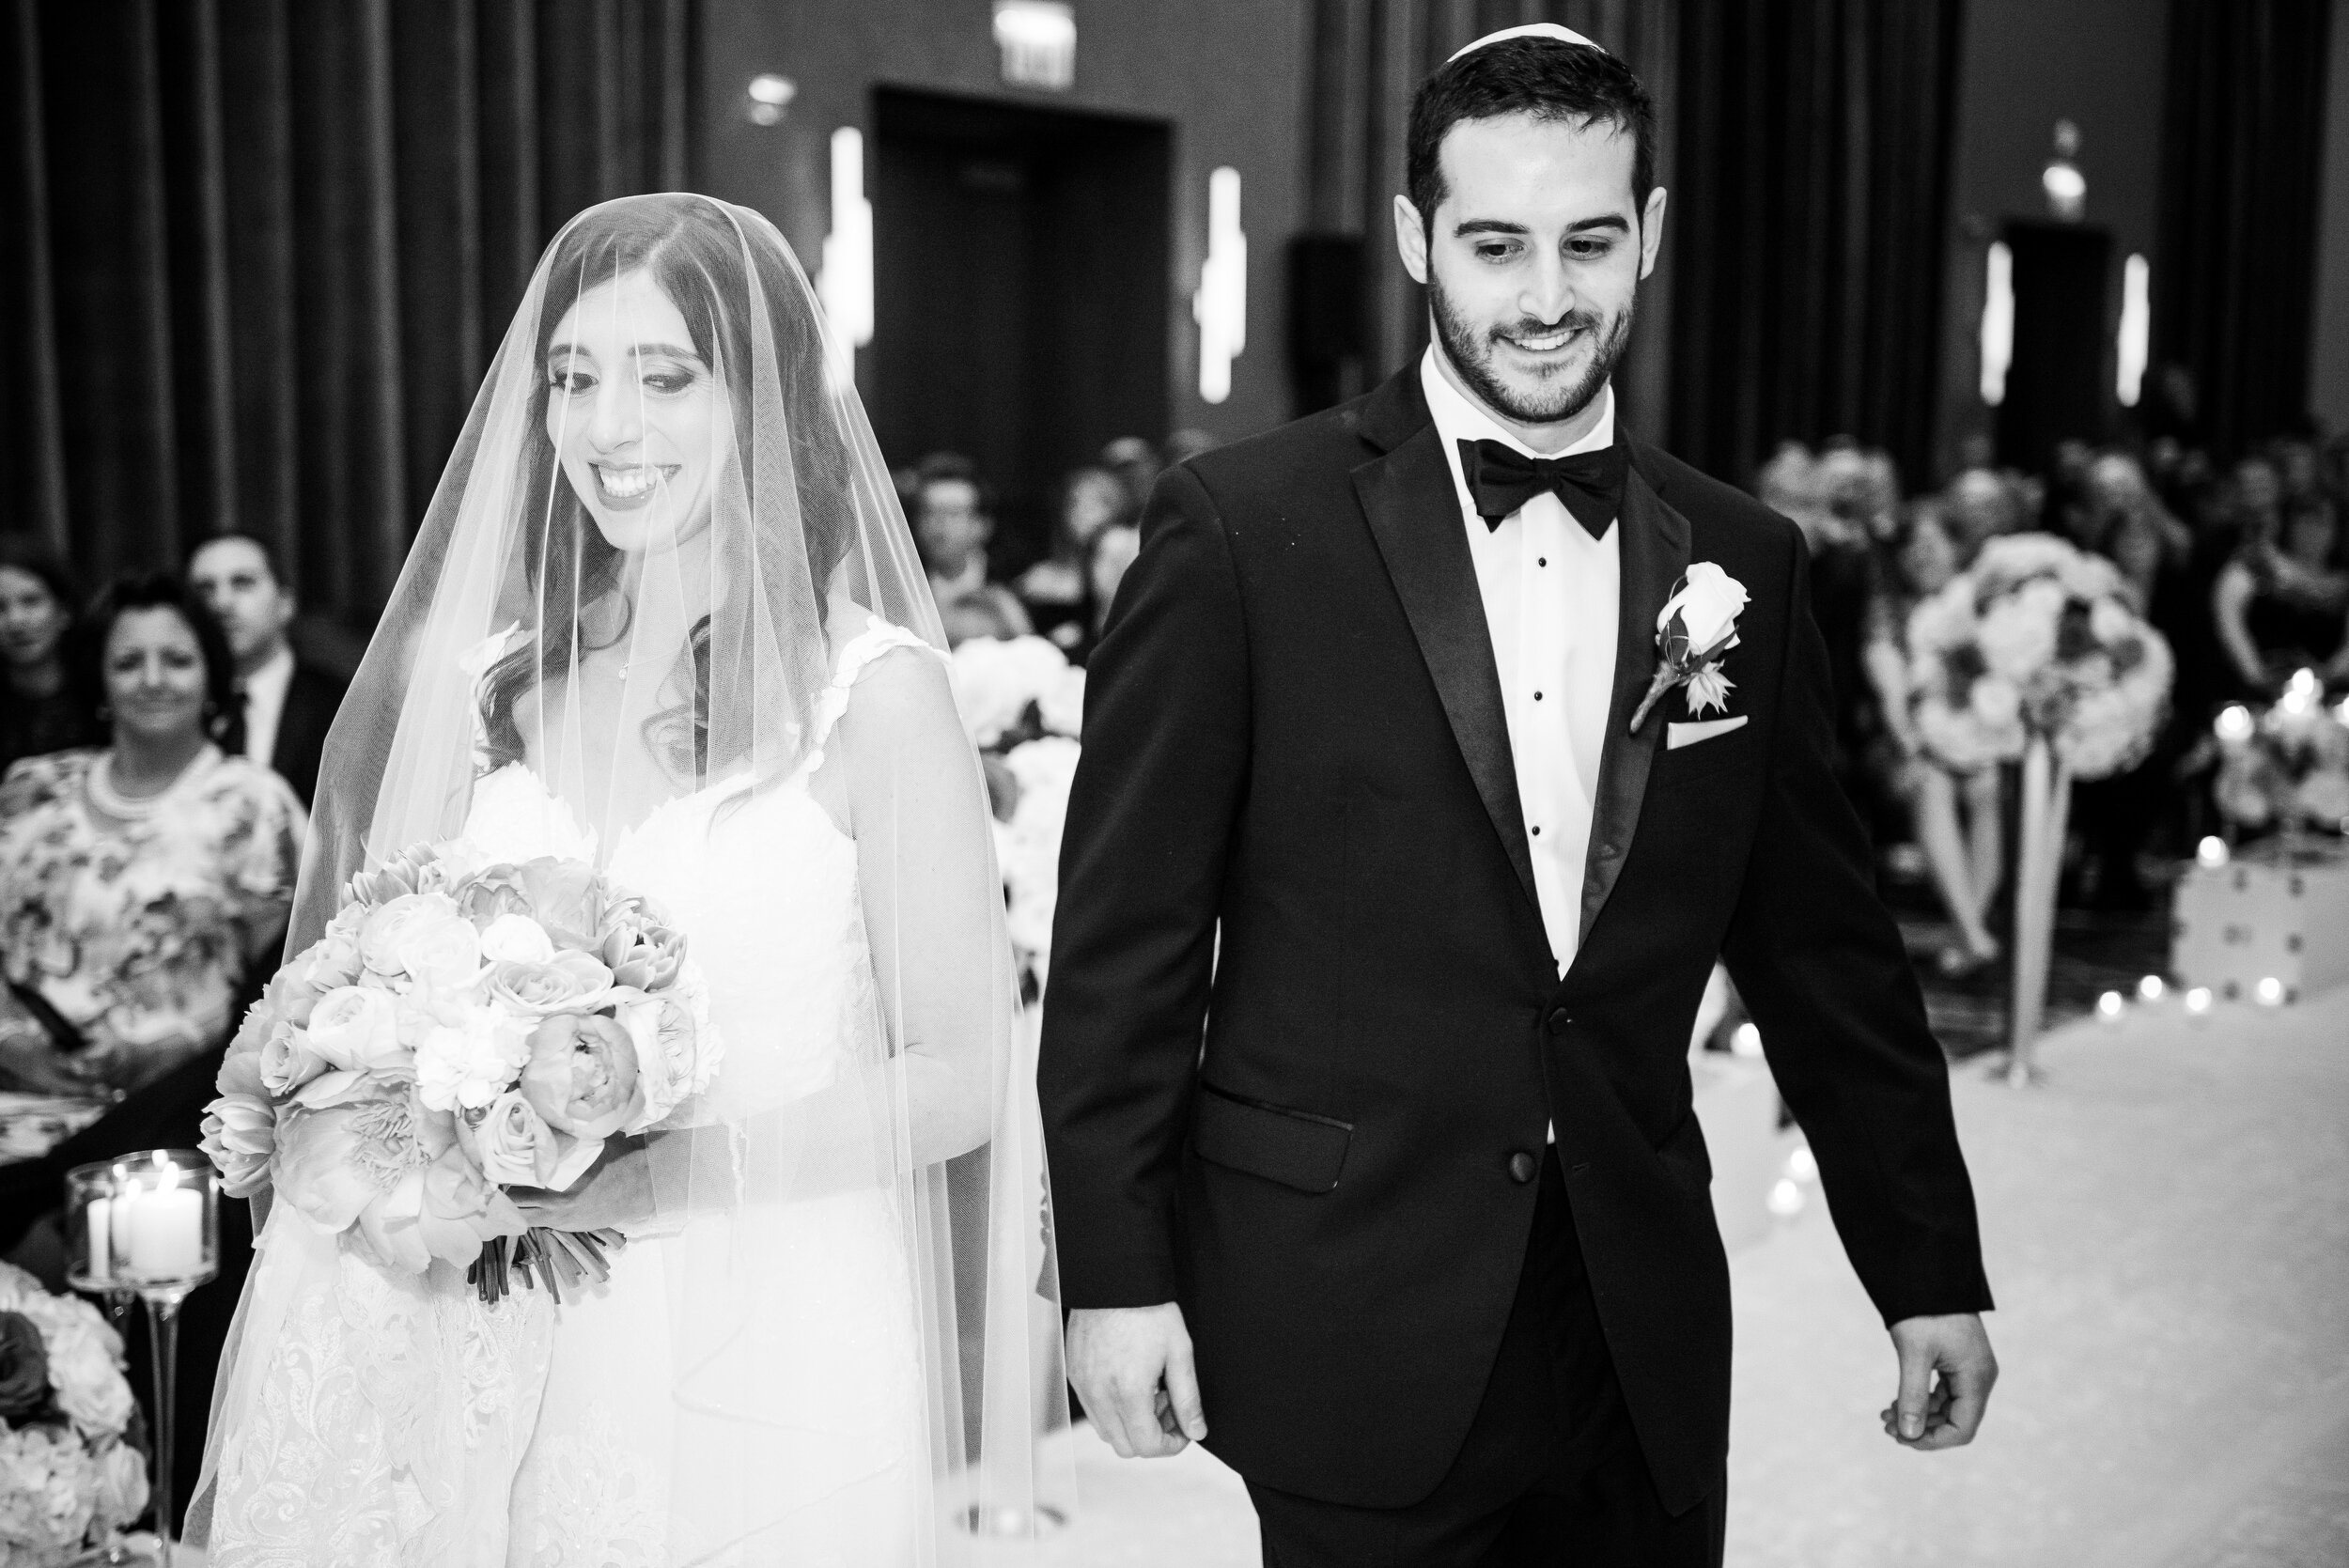 Black and white wedding photos: Loews Chicago Hotel Wedding captured by J. Brown Photography